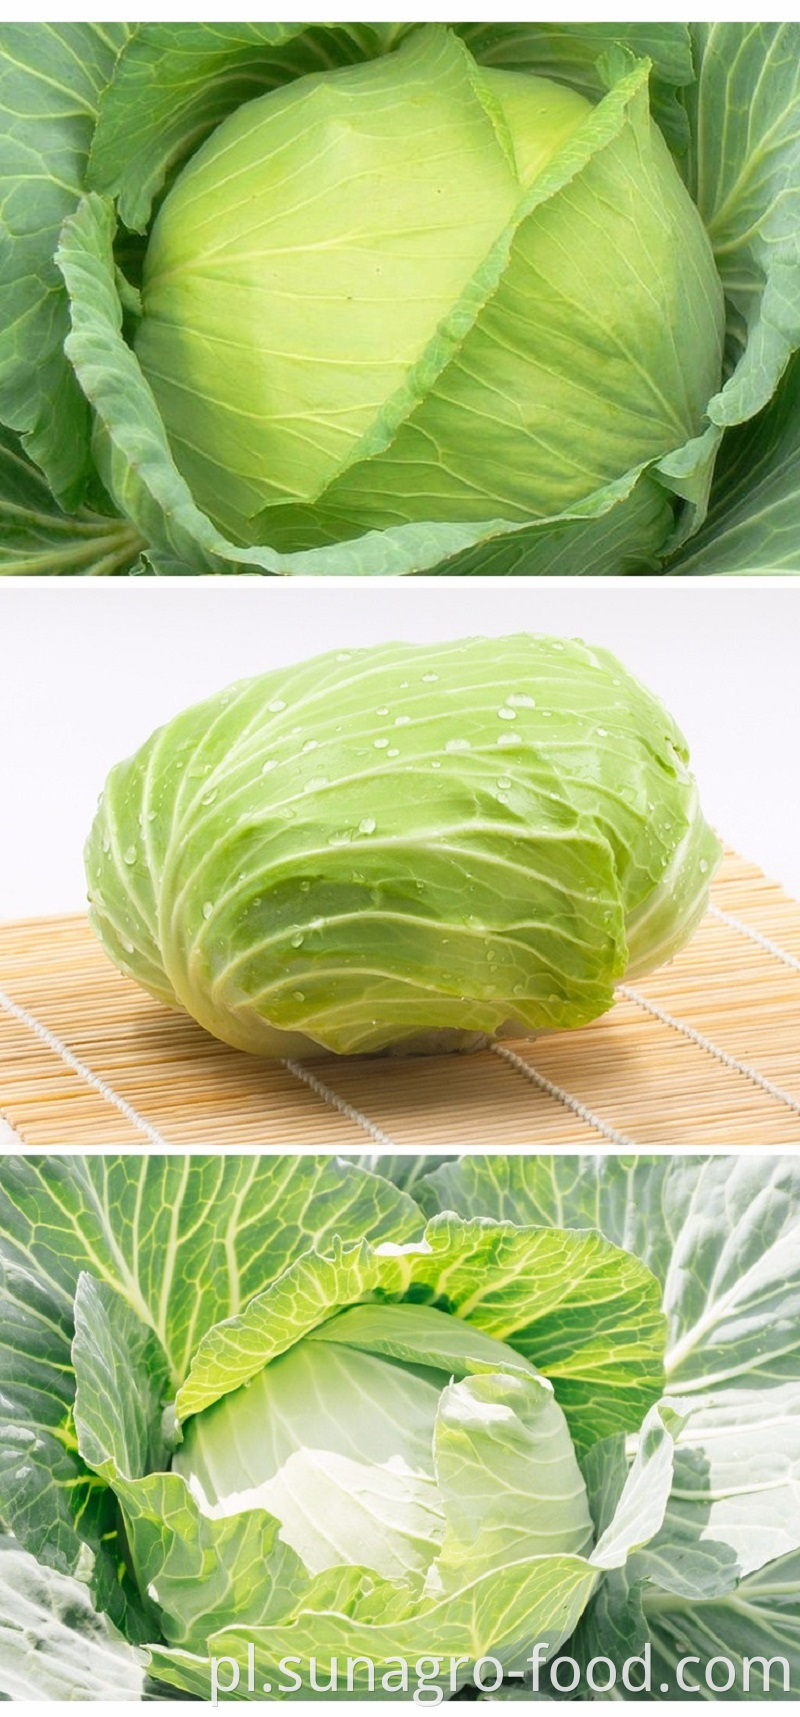 Organic Healthy Vegetable Of Cabbage